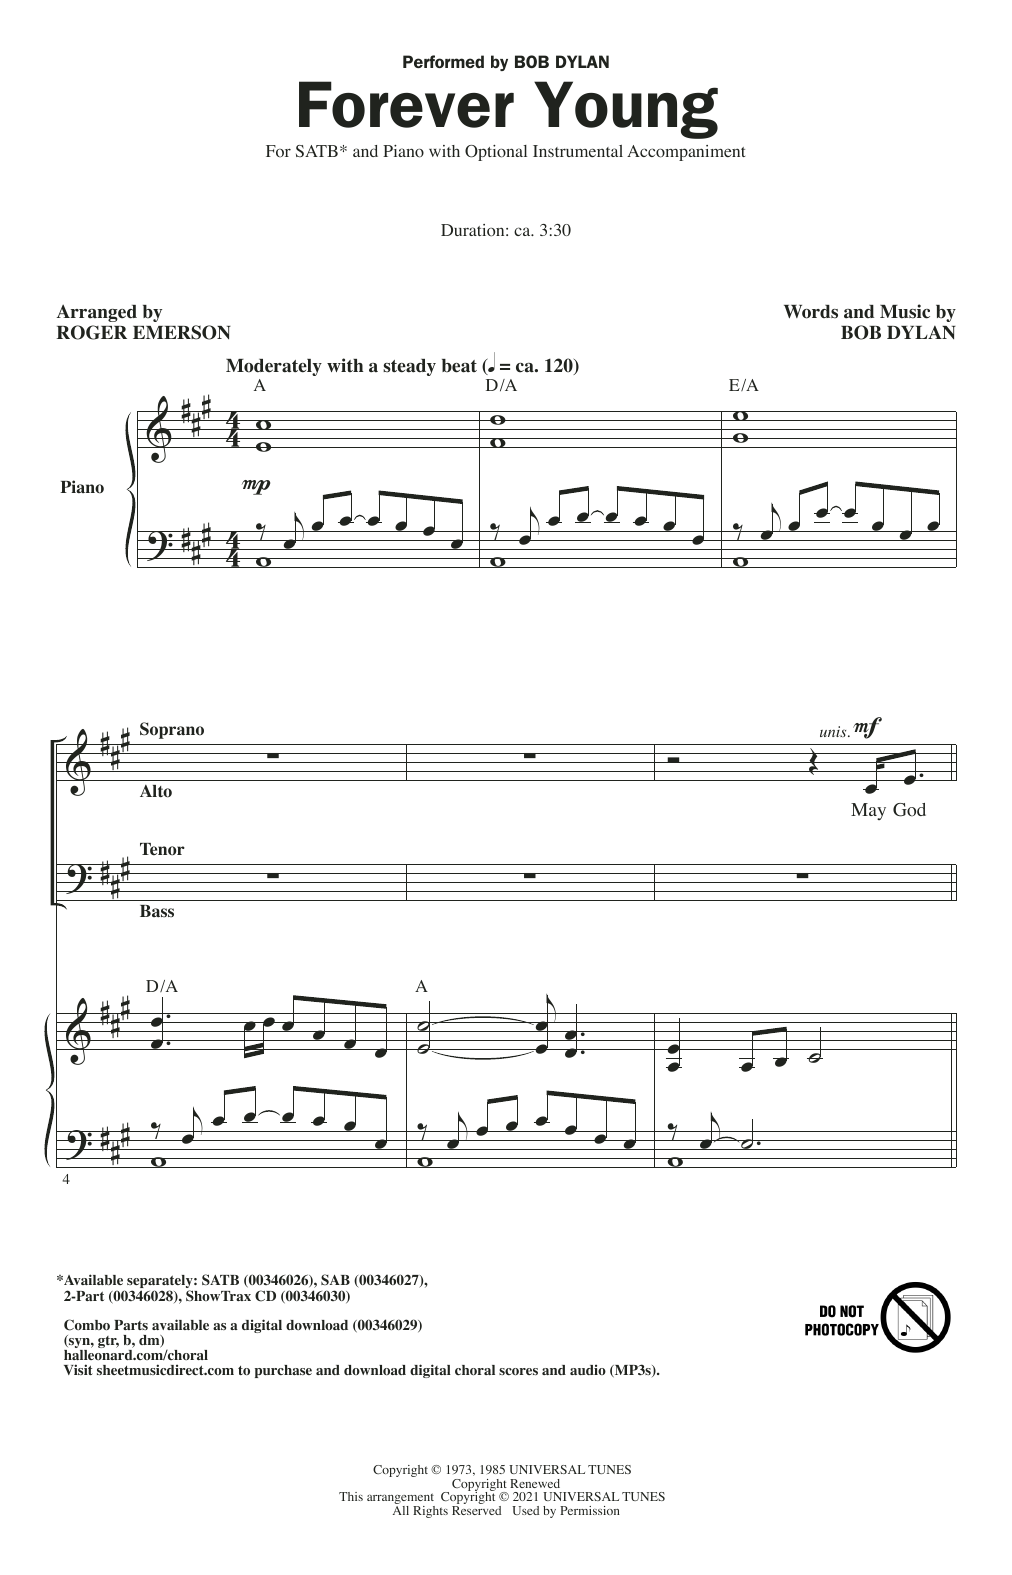 Download Bob Dylan Forever Young (arr. Roger Emerson) Sheet Music